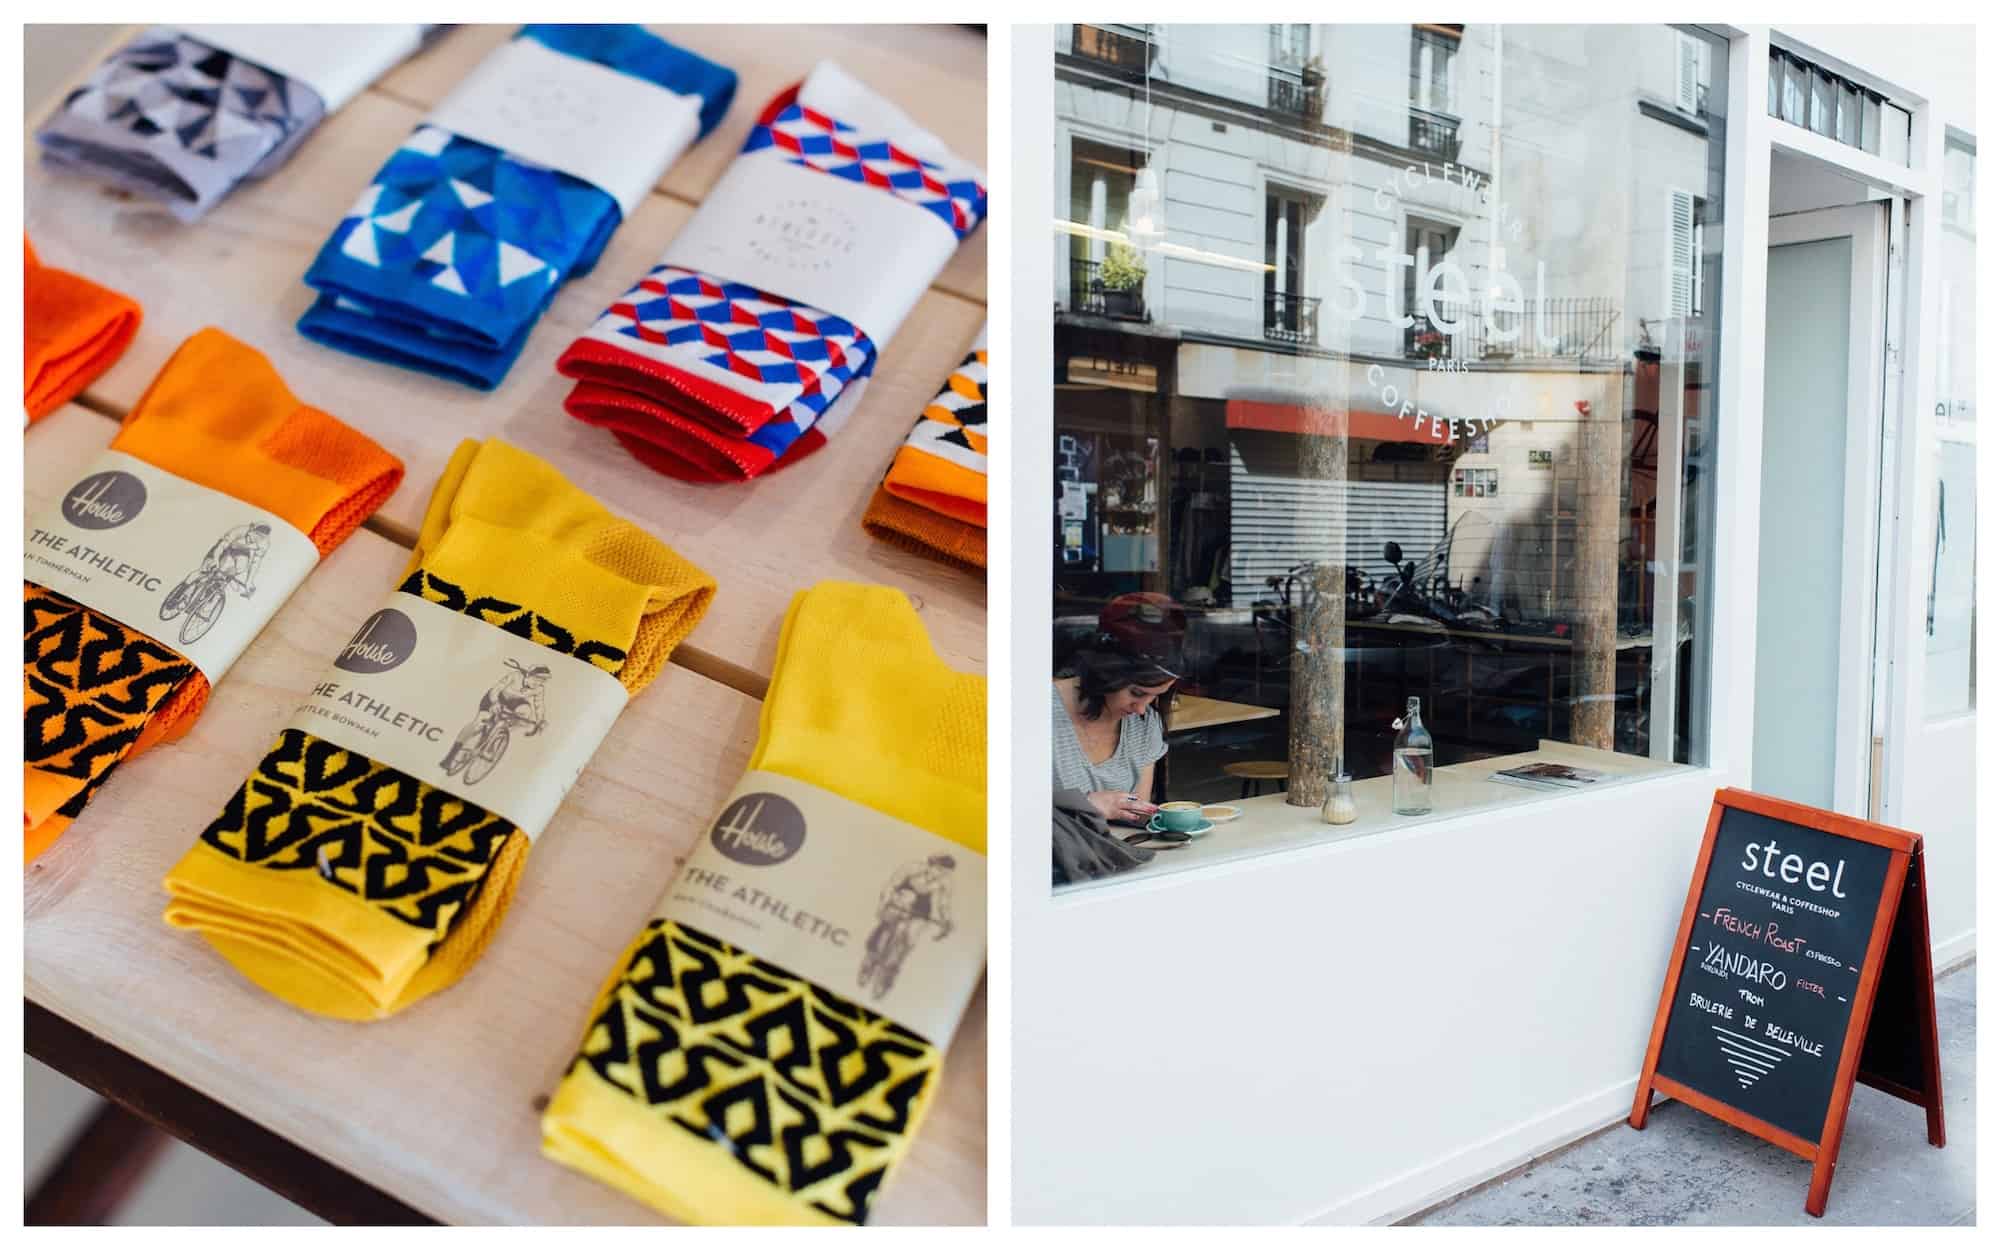 Colorful socks with zany patterns at Paris concept store Steel Cyclewear (left). Outside Steel Cyclewear Paris concept store cafe with a chalkboard menu (right).